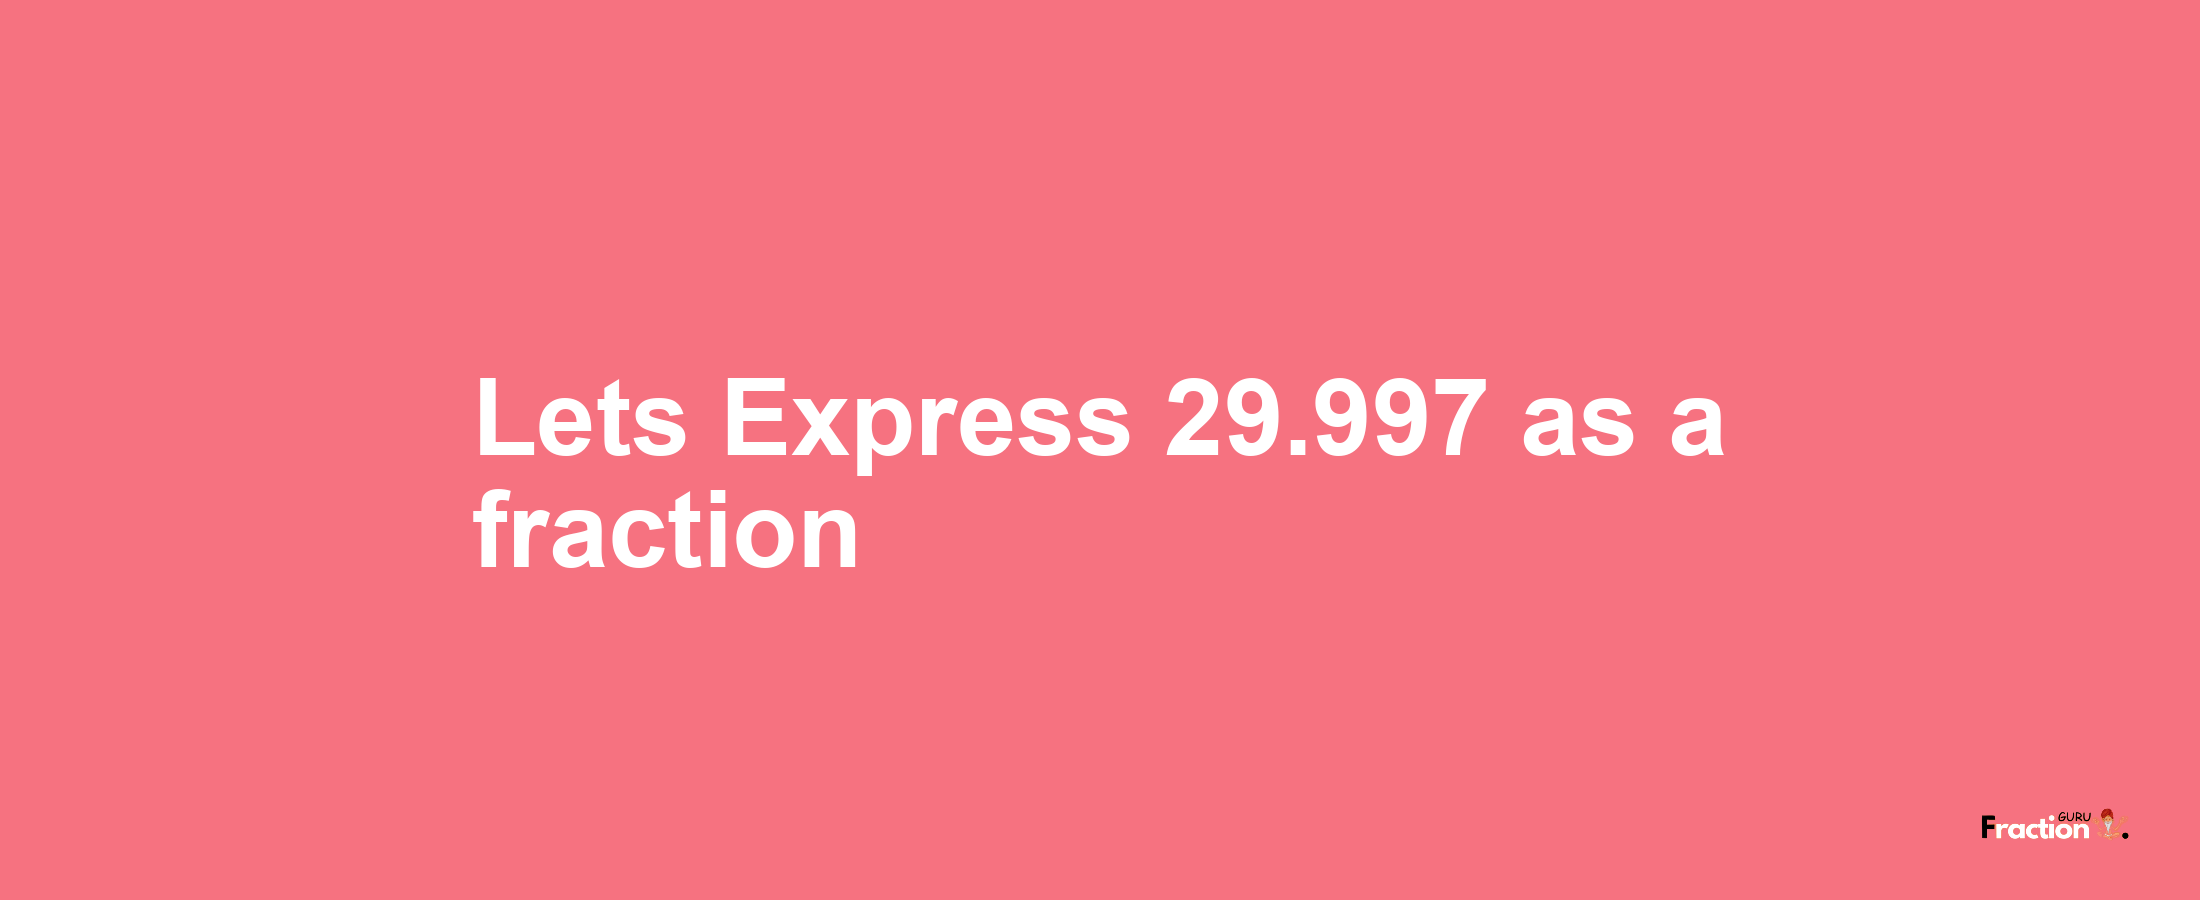 Lets Express 29.997 as afraction